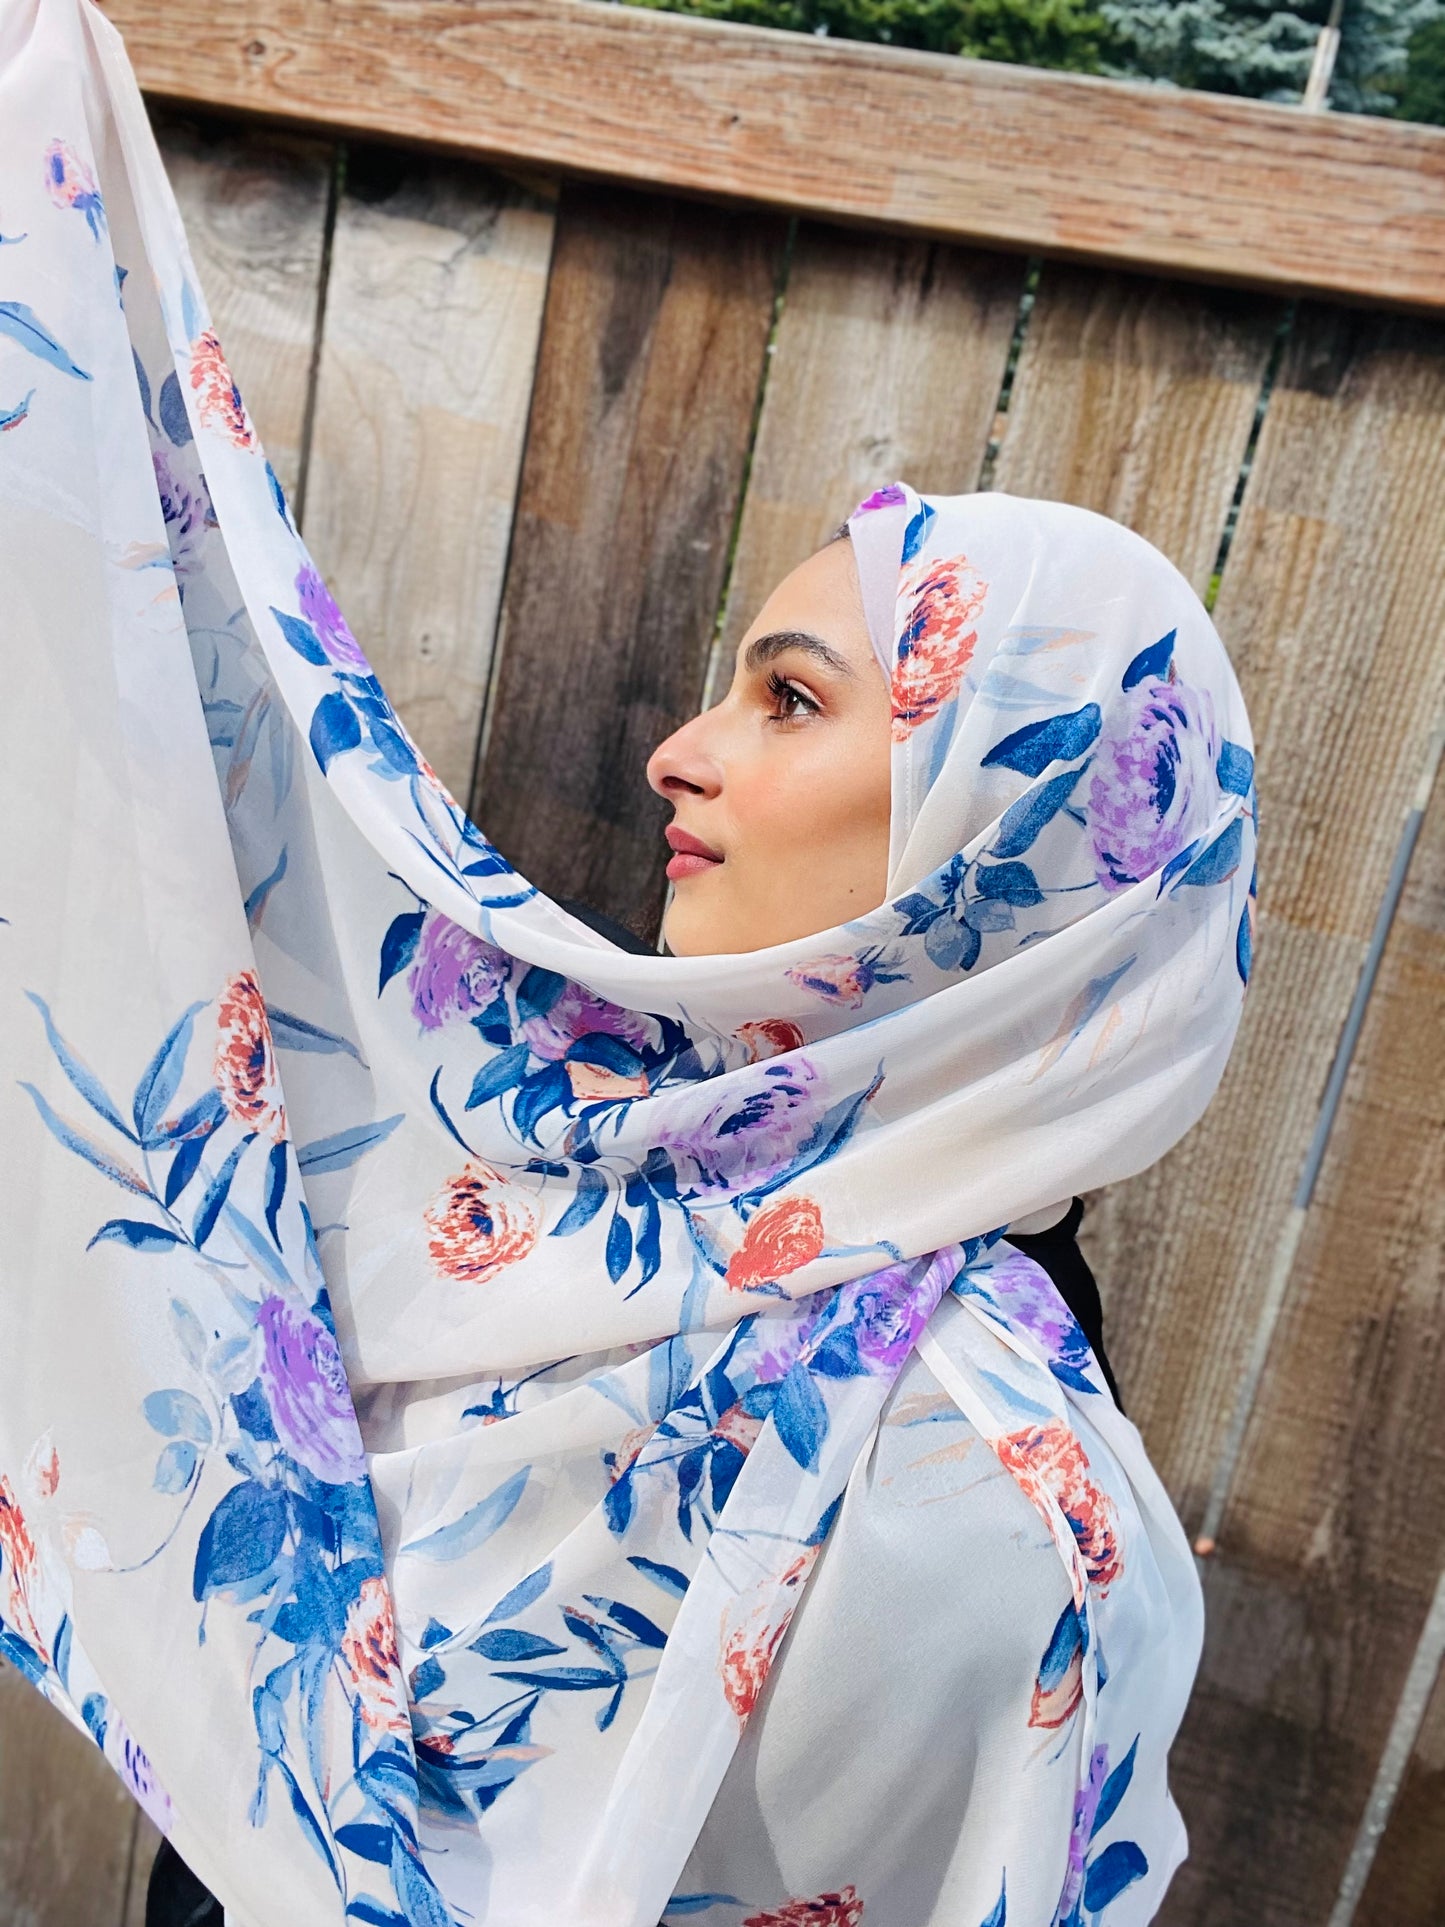 Limited Edition Crepe Chiffon Hijab: Homecoming Queen